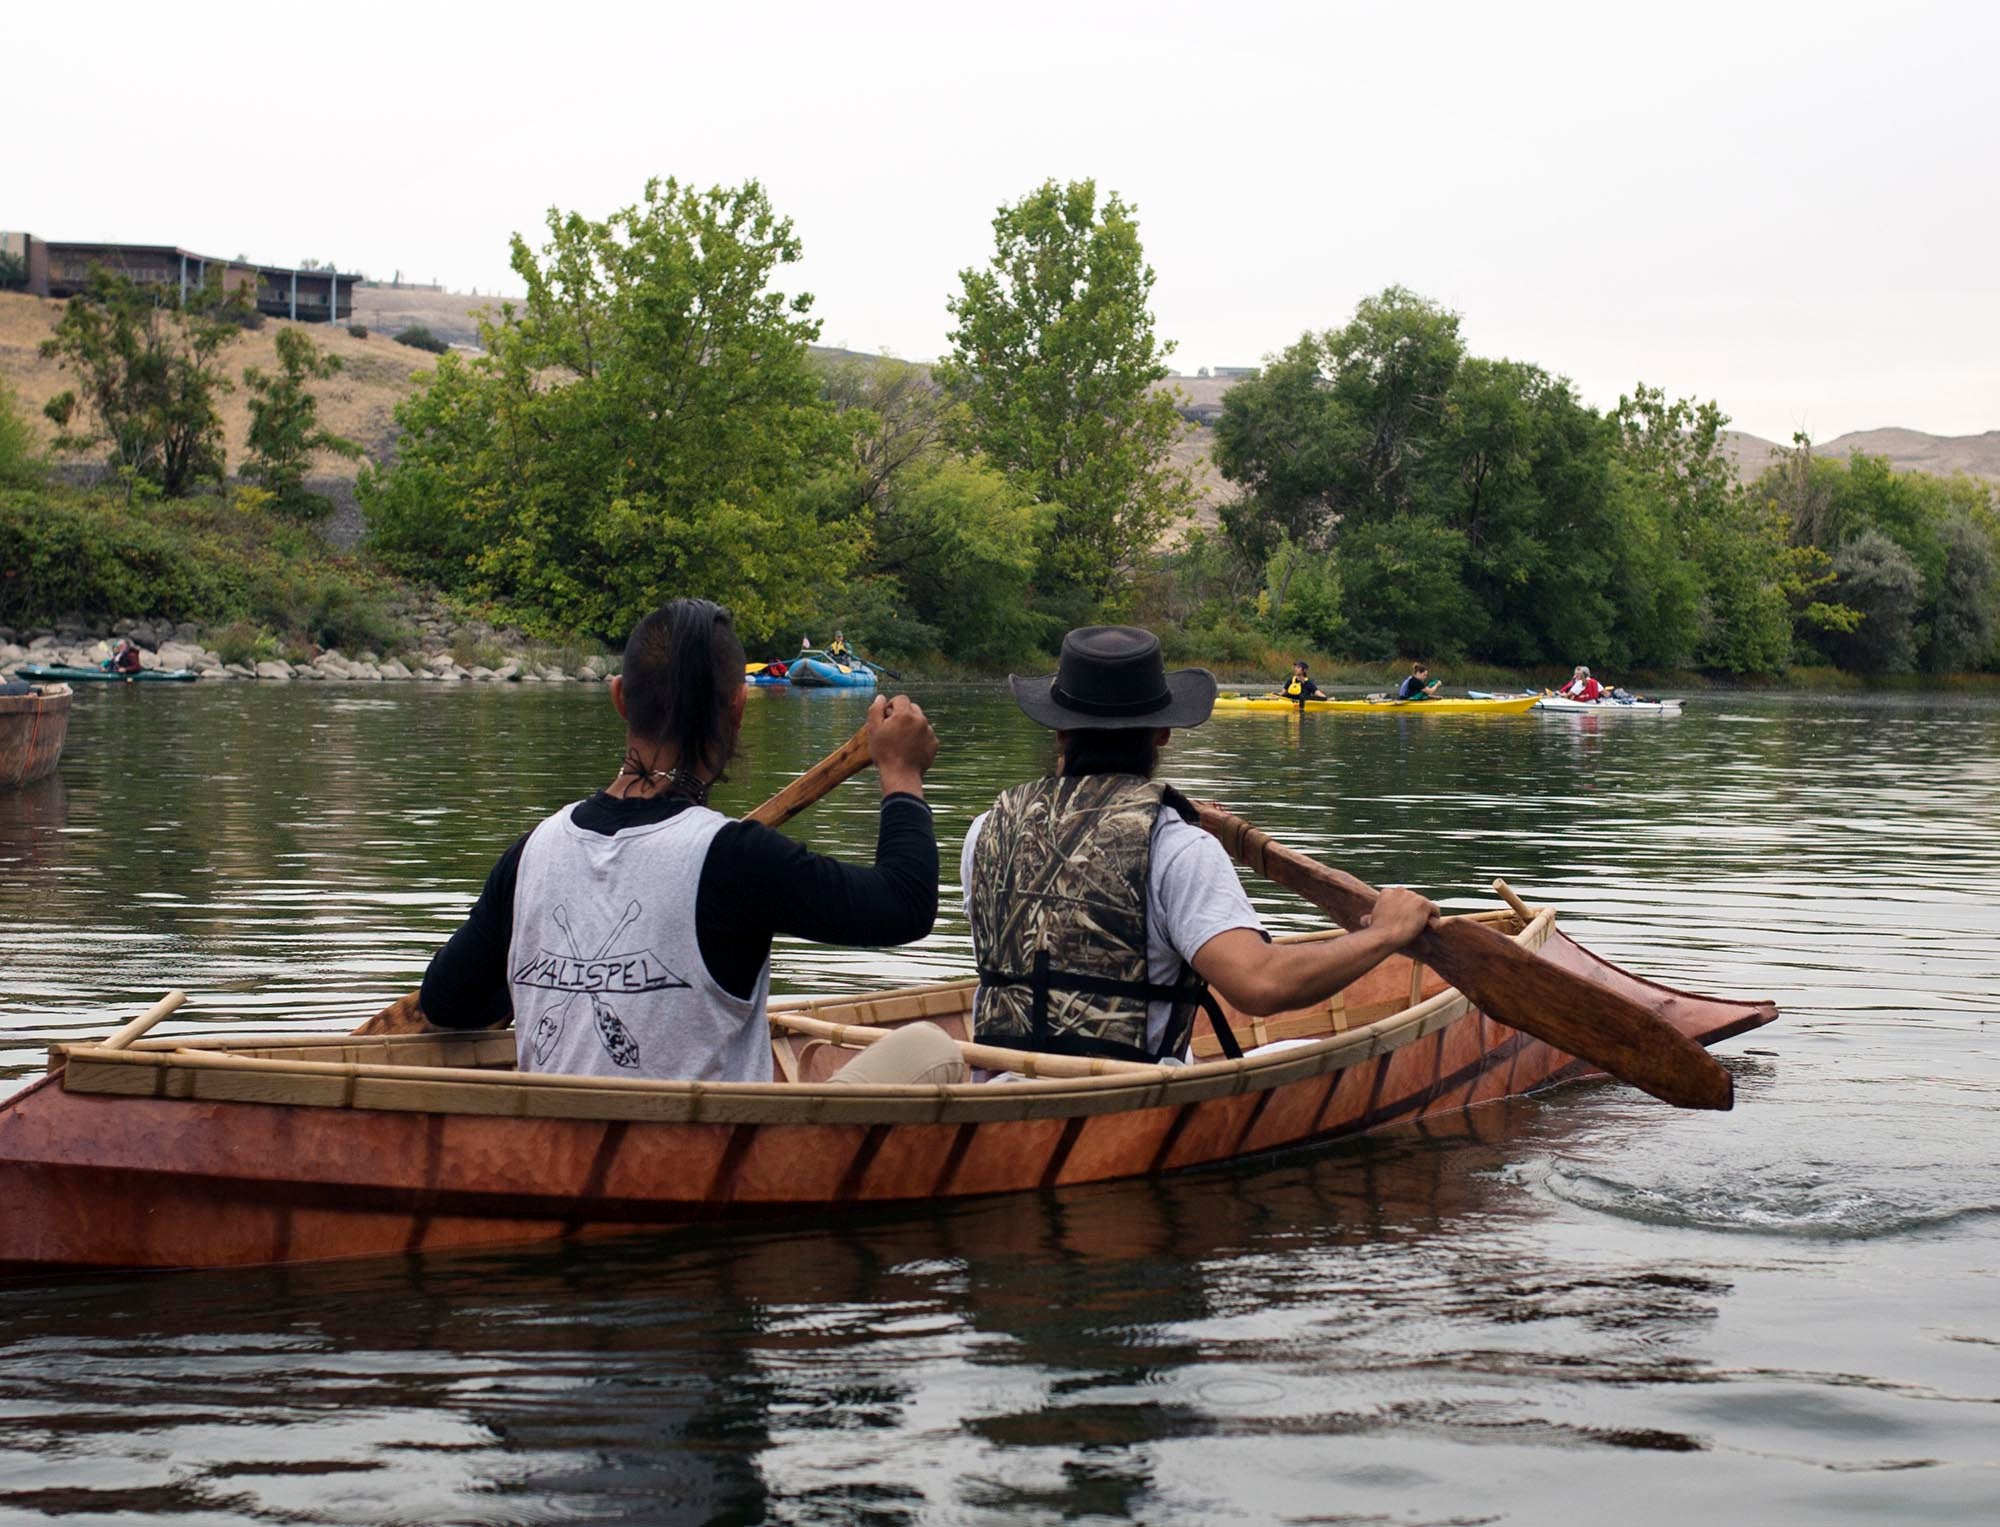 Nathan Piengkham (left), a member of the Kalispel Tribe of Indians, paddles the Snake River during last year&#039;s Free the Snake Flotilla. He also joined a group of tribal members who traveled to Standing Rock last year with traditional hand-carved canoes. At a March 2017 treaty rights conference in Lewiston, Idaho, he and other tribal members reflected on how treaty rights and cultural tradition have aided in movements to protect the environment.
(Chris Jordan-Bloch / Earthjustice)